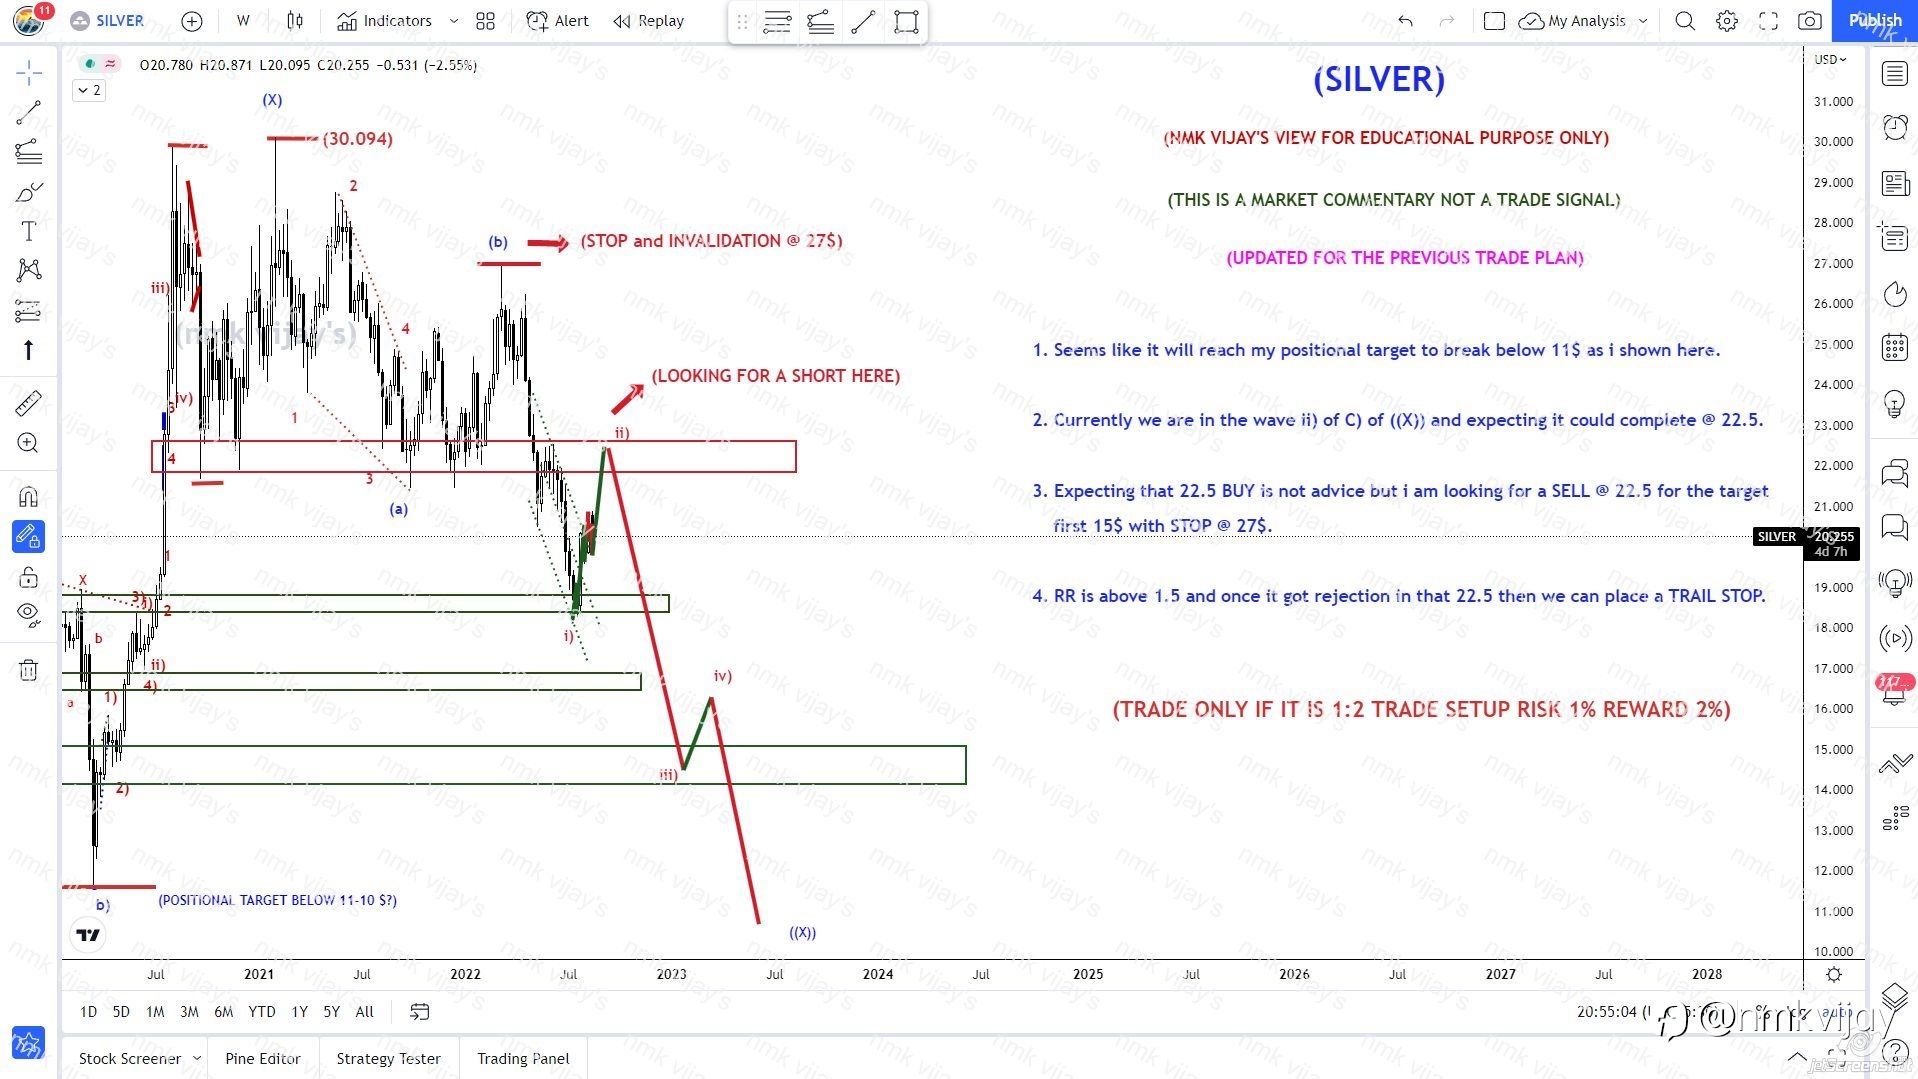 SILVER-Will complete wave ii) @ 22.5 ?